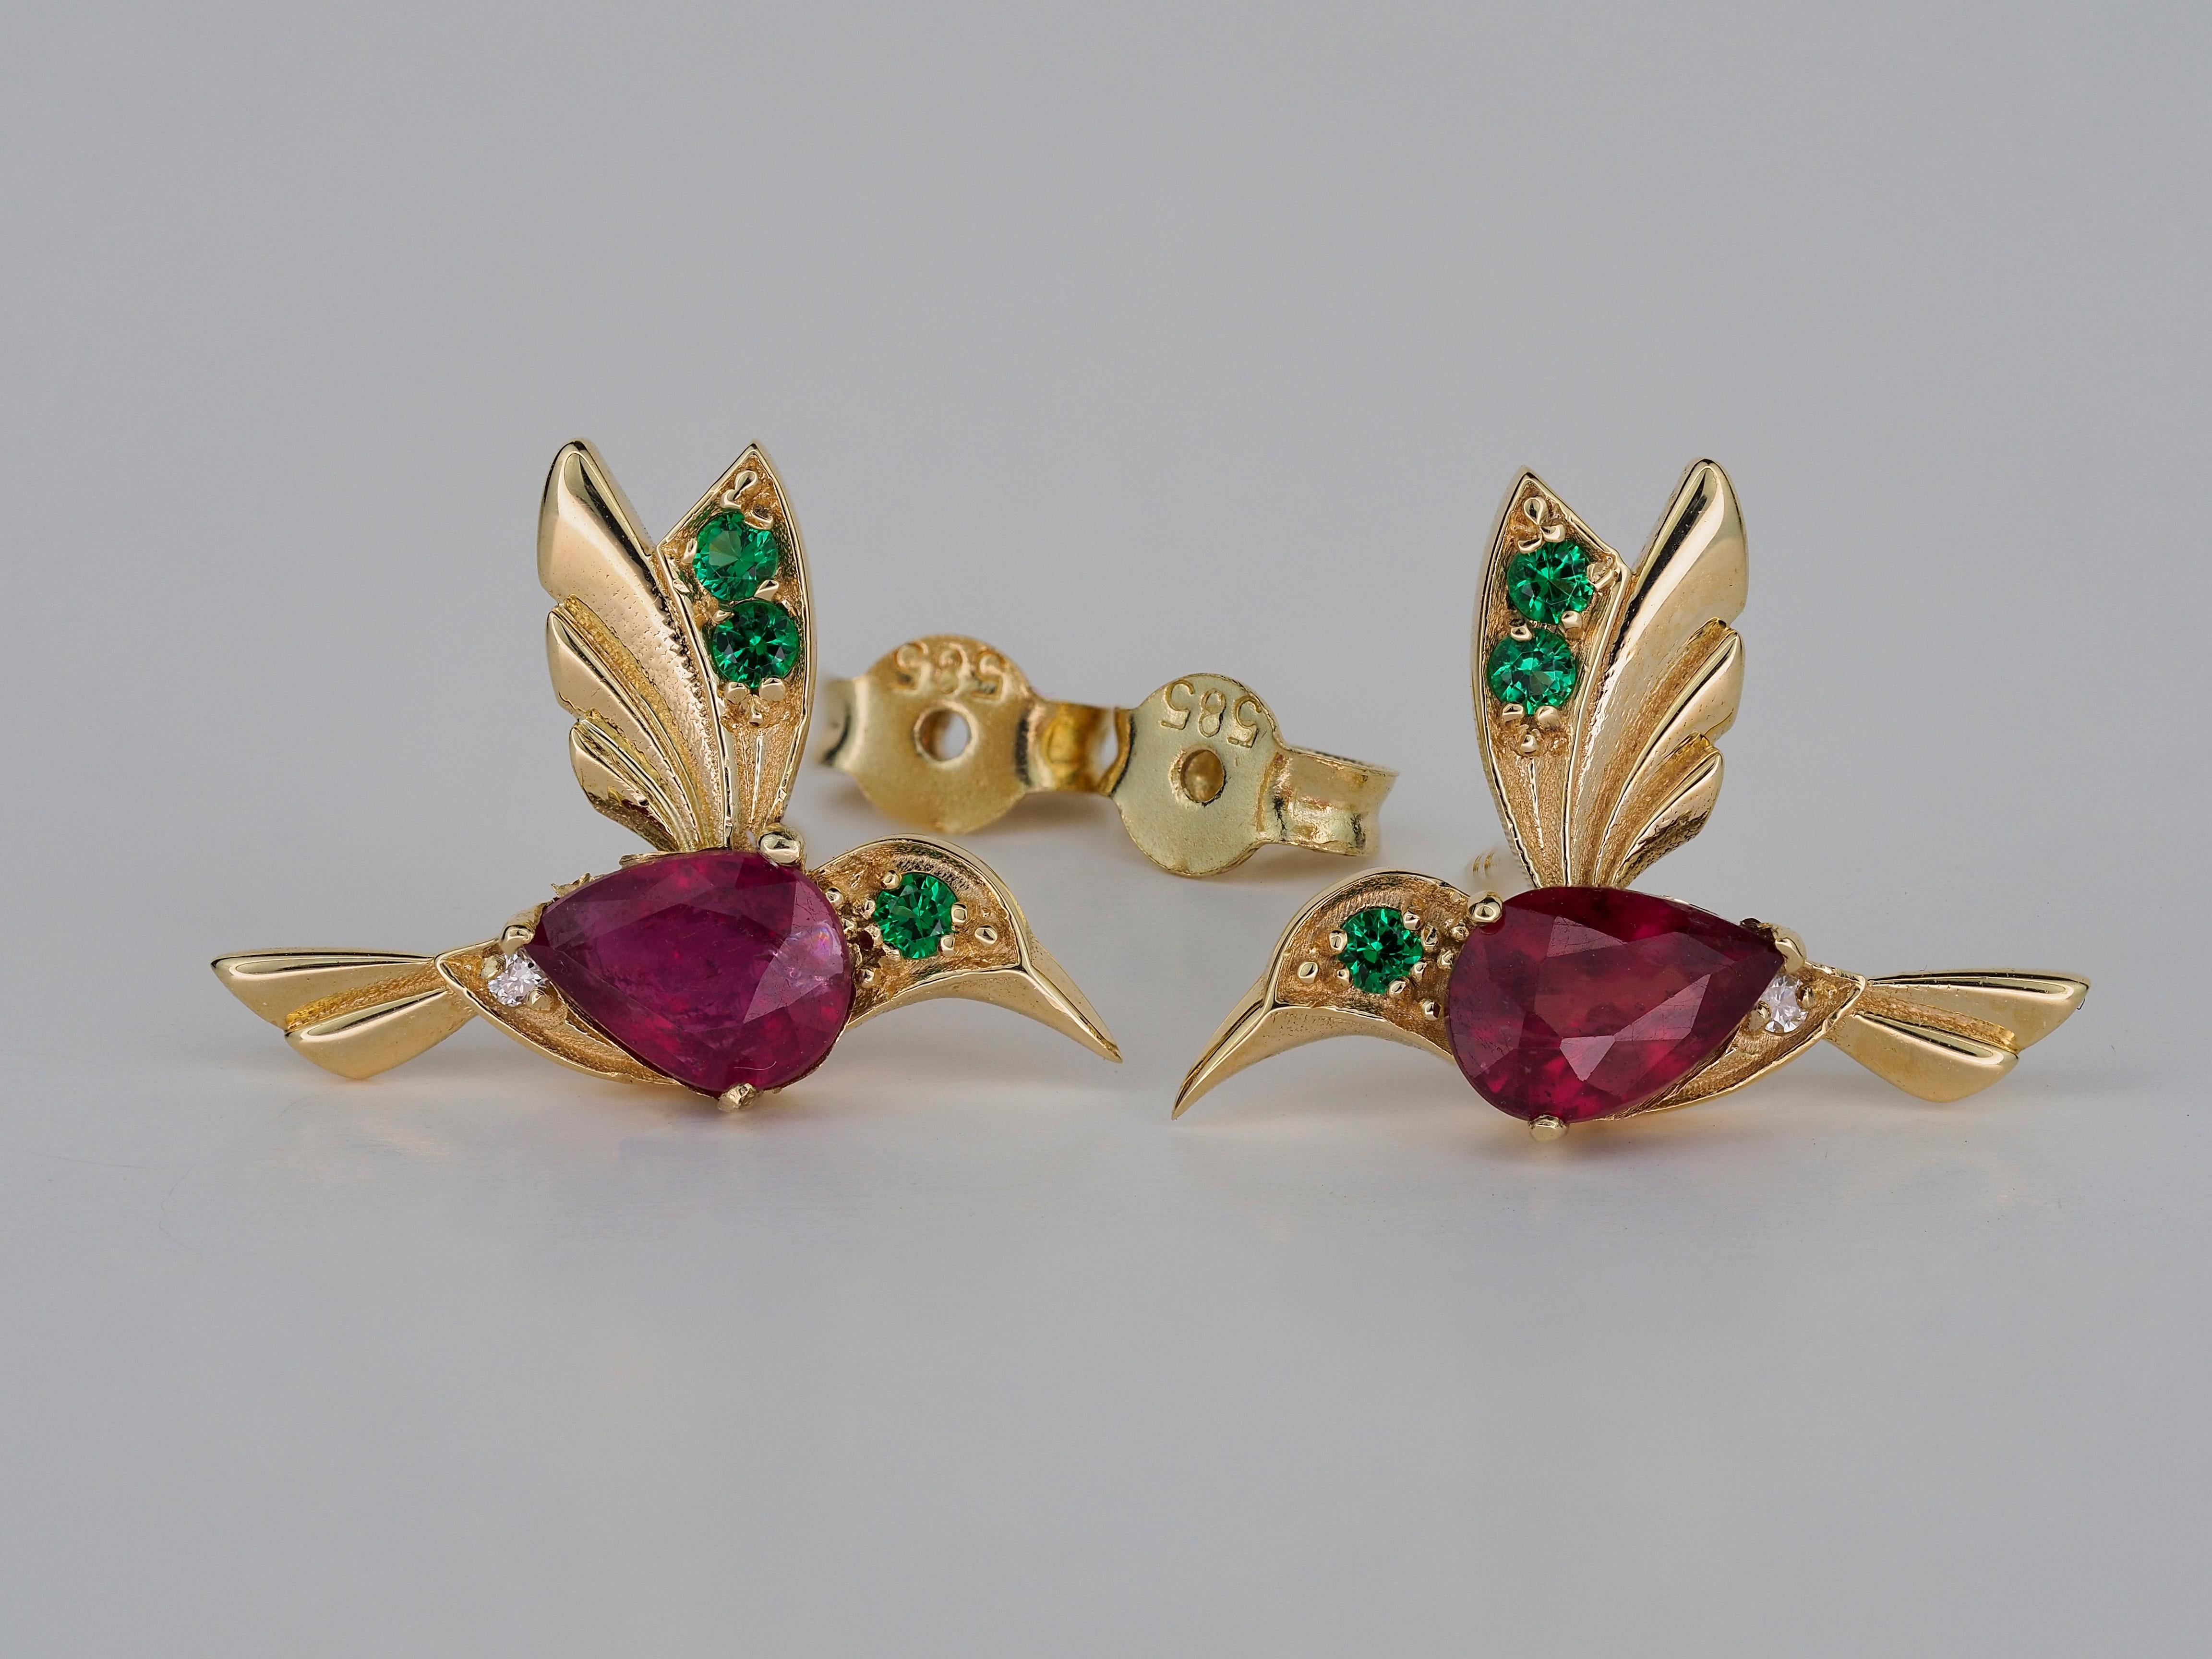 14k Gold Hummingbird Earings Studs with Rubies, Bird Stud Earrings with Gems ! For Sale 5